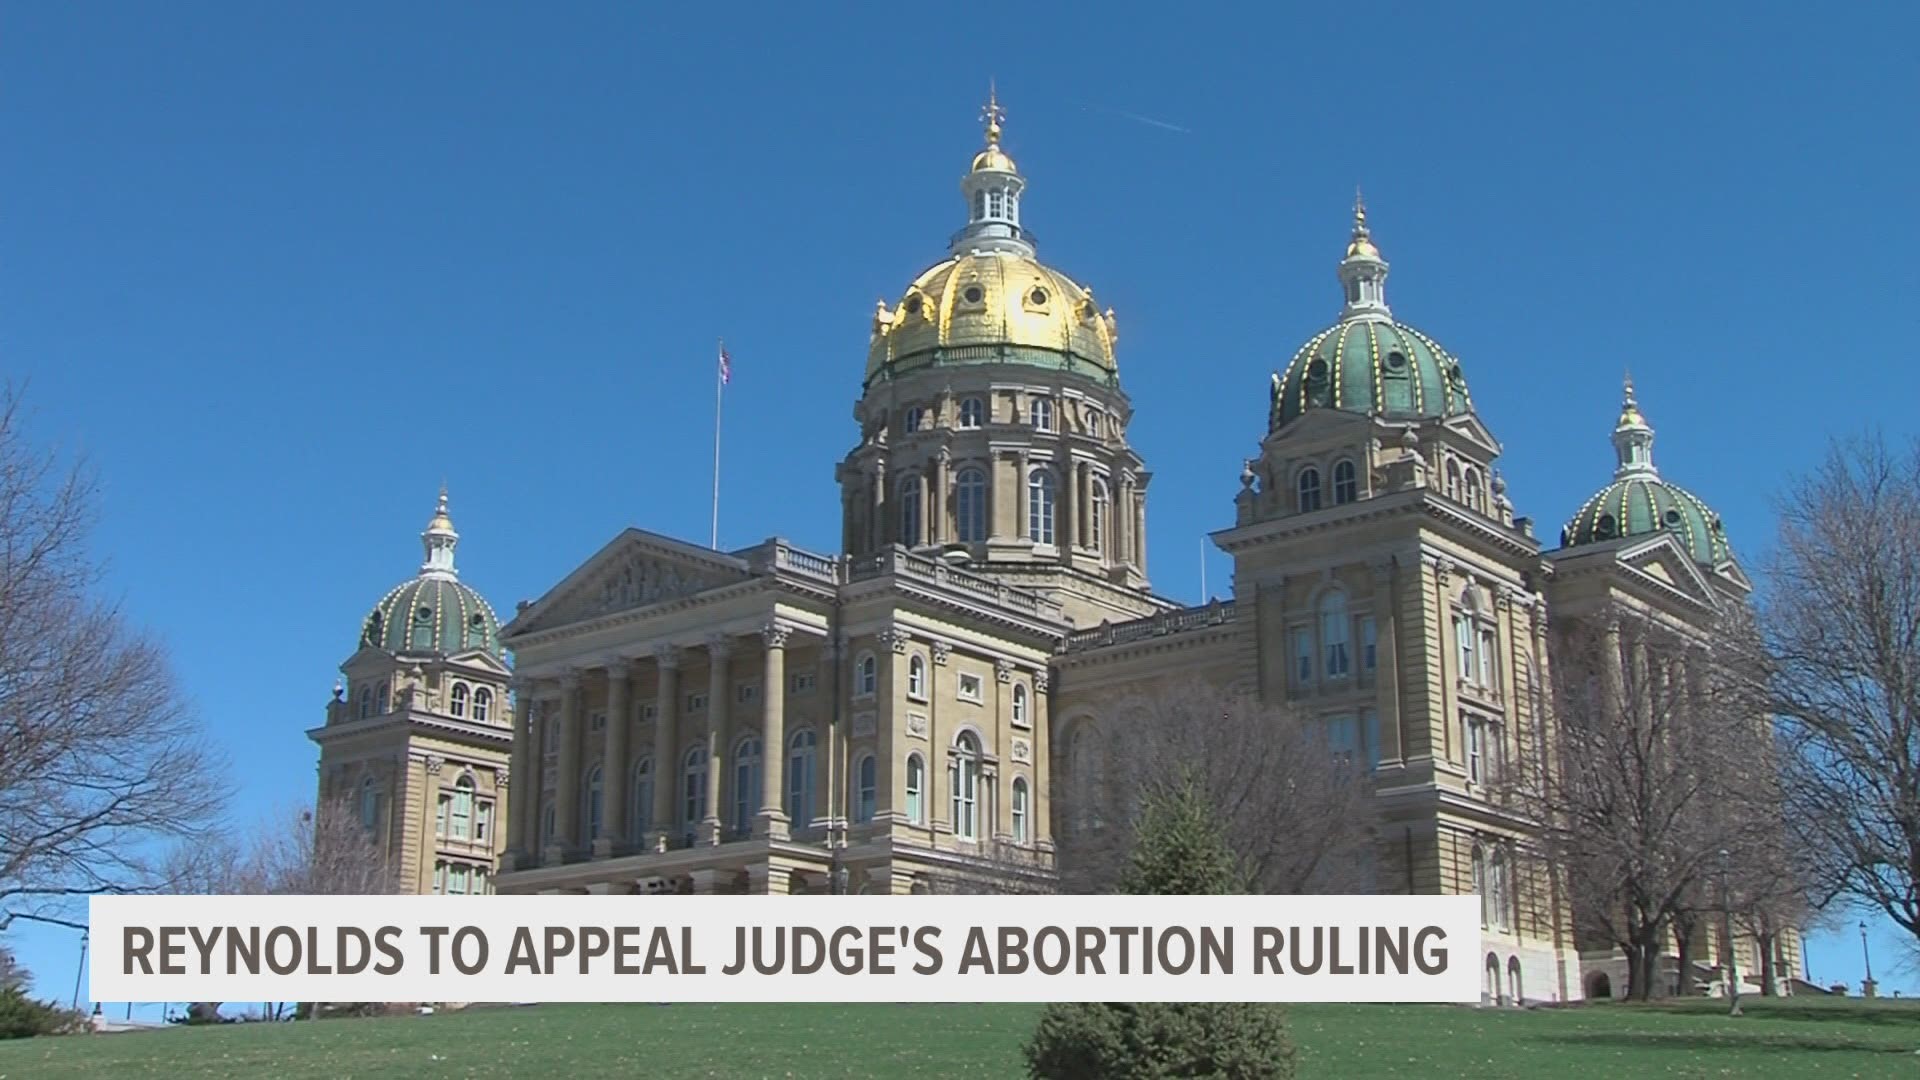 A Johnson County court ruled that mandating a 24-hour waiting period for abortions violates the state constitution.